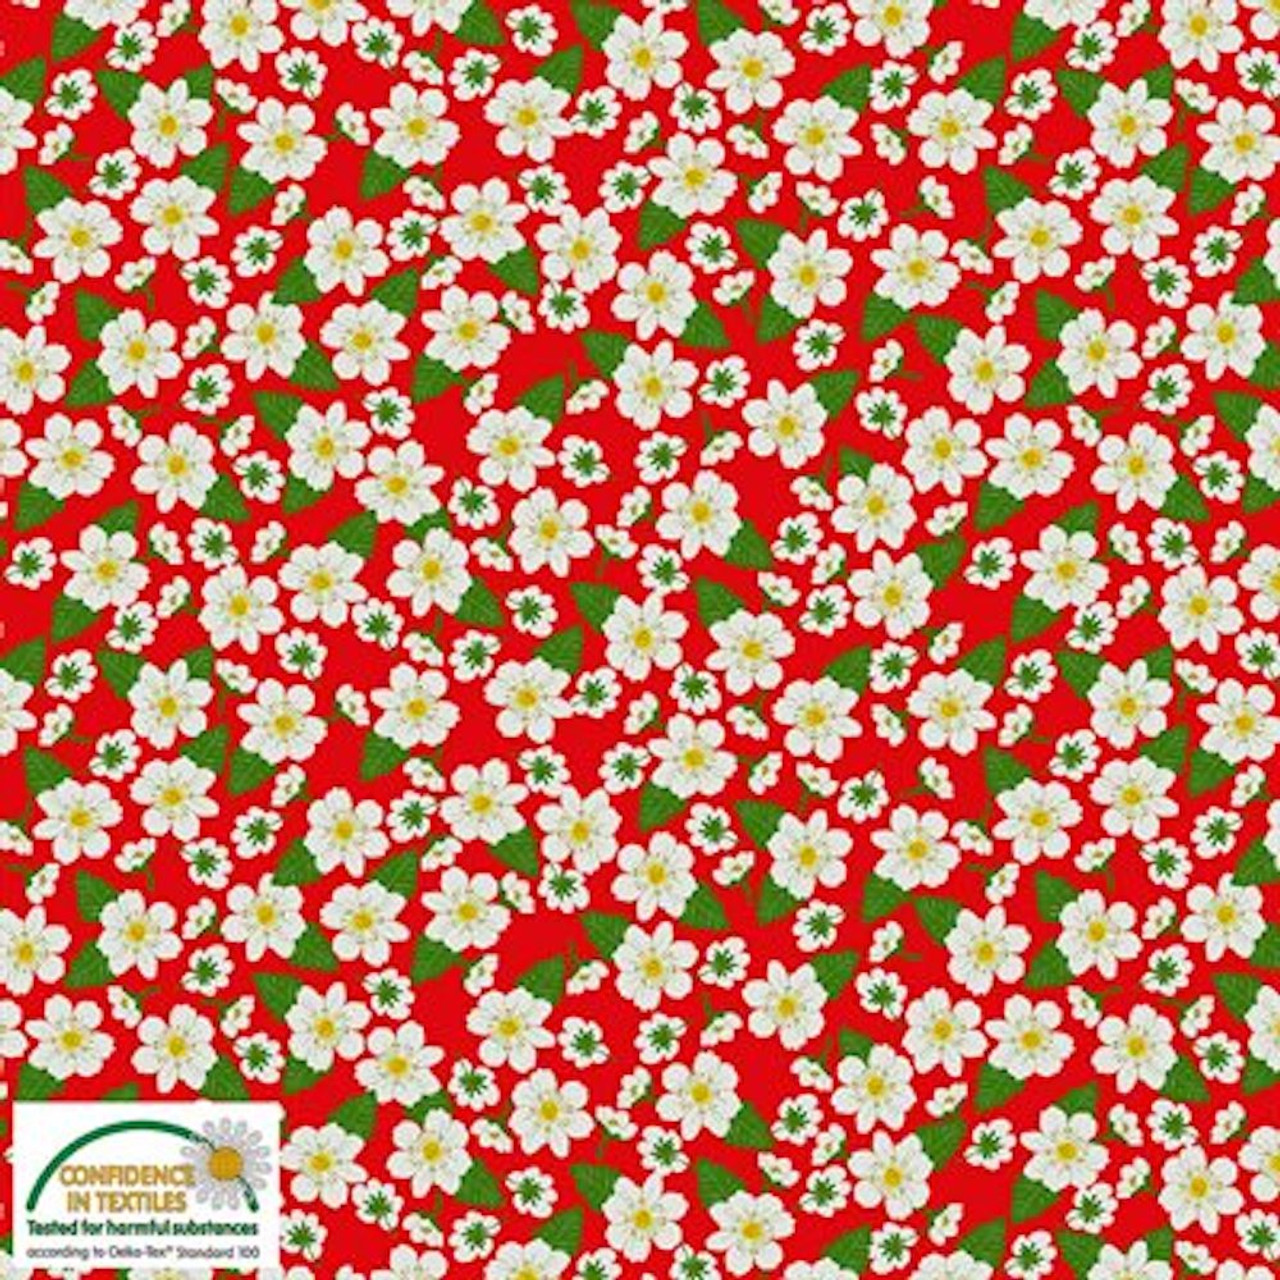 Stof Summer Berries Small Floral Pink Cotton Fabric By The Yard